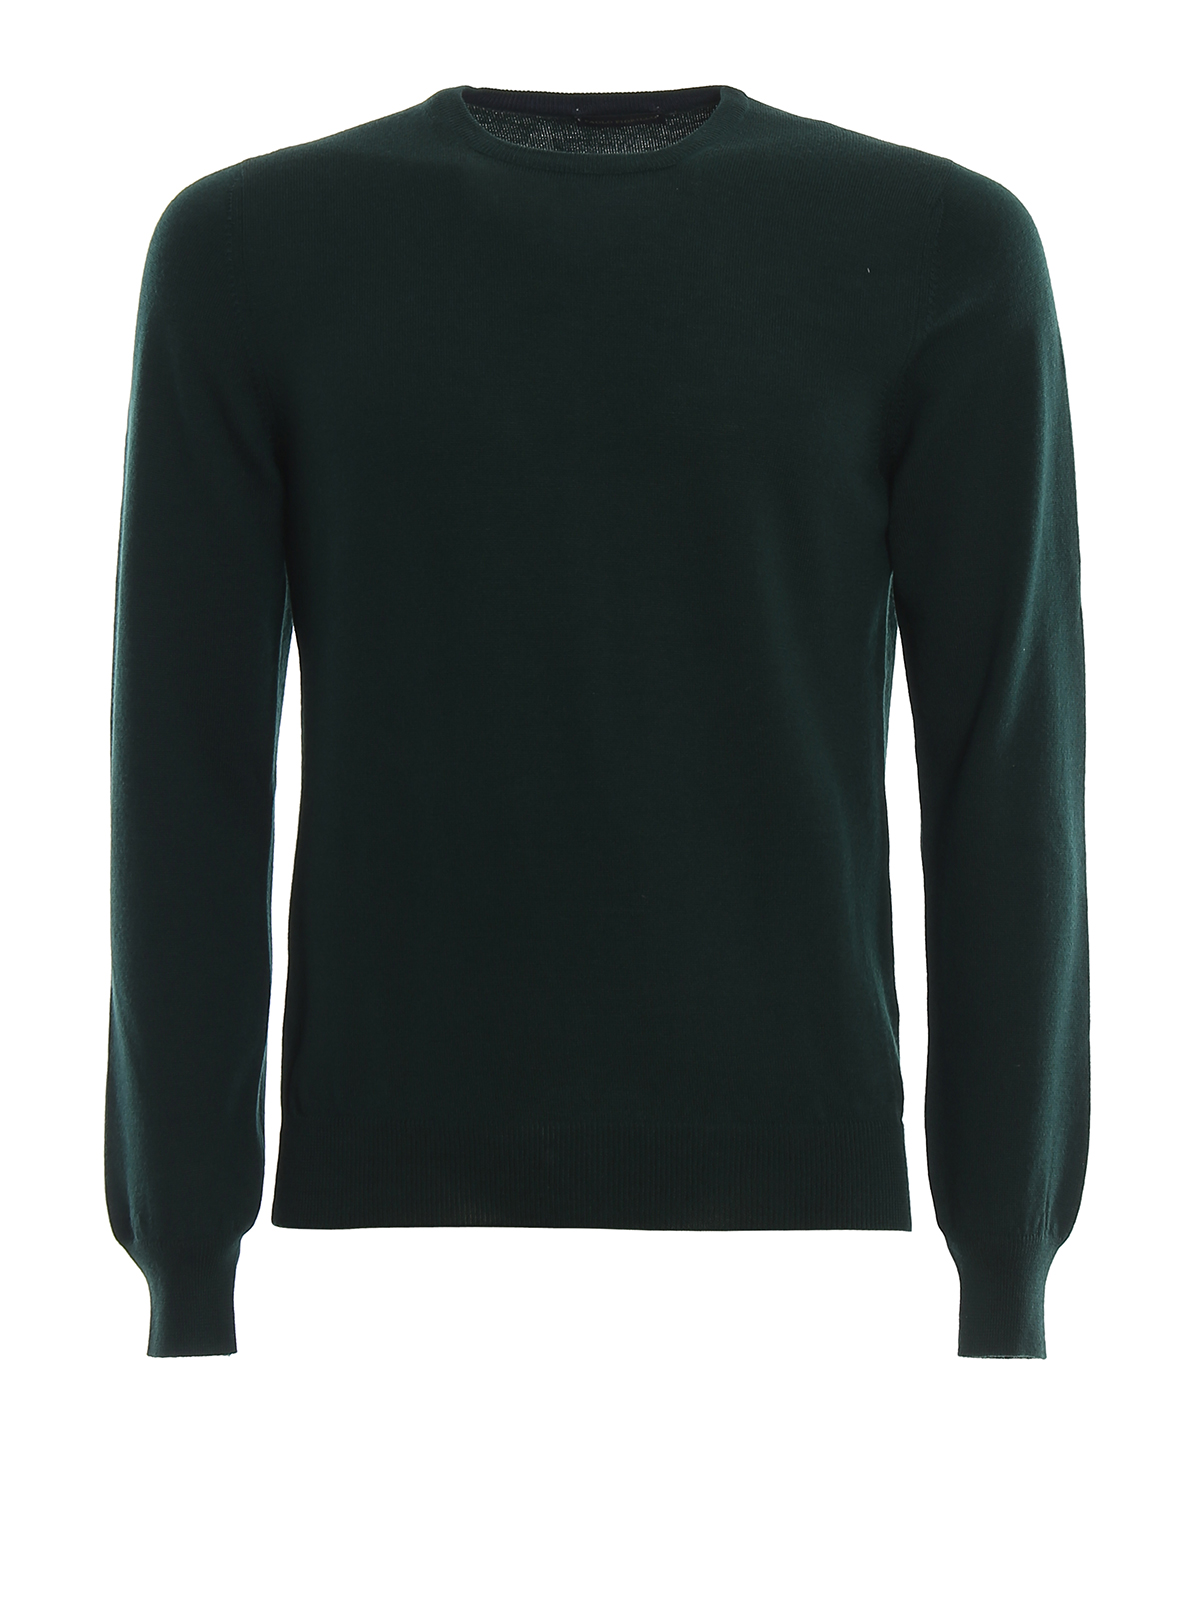 Paolo Fiorillo Green Combed Wool Sweater